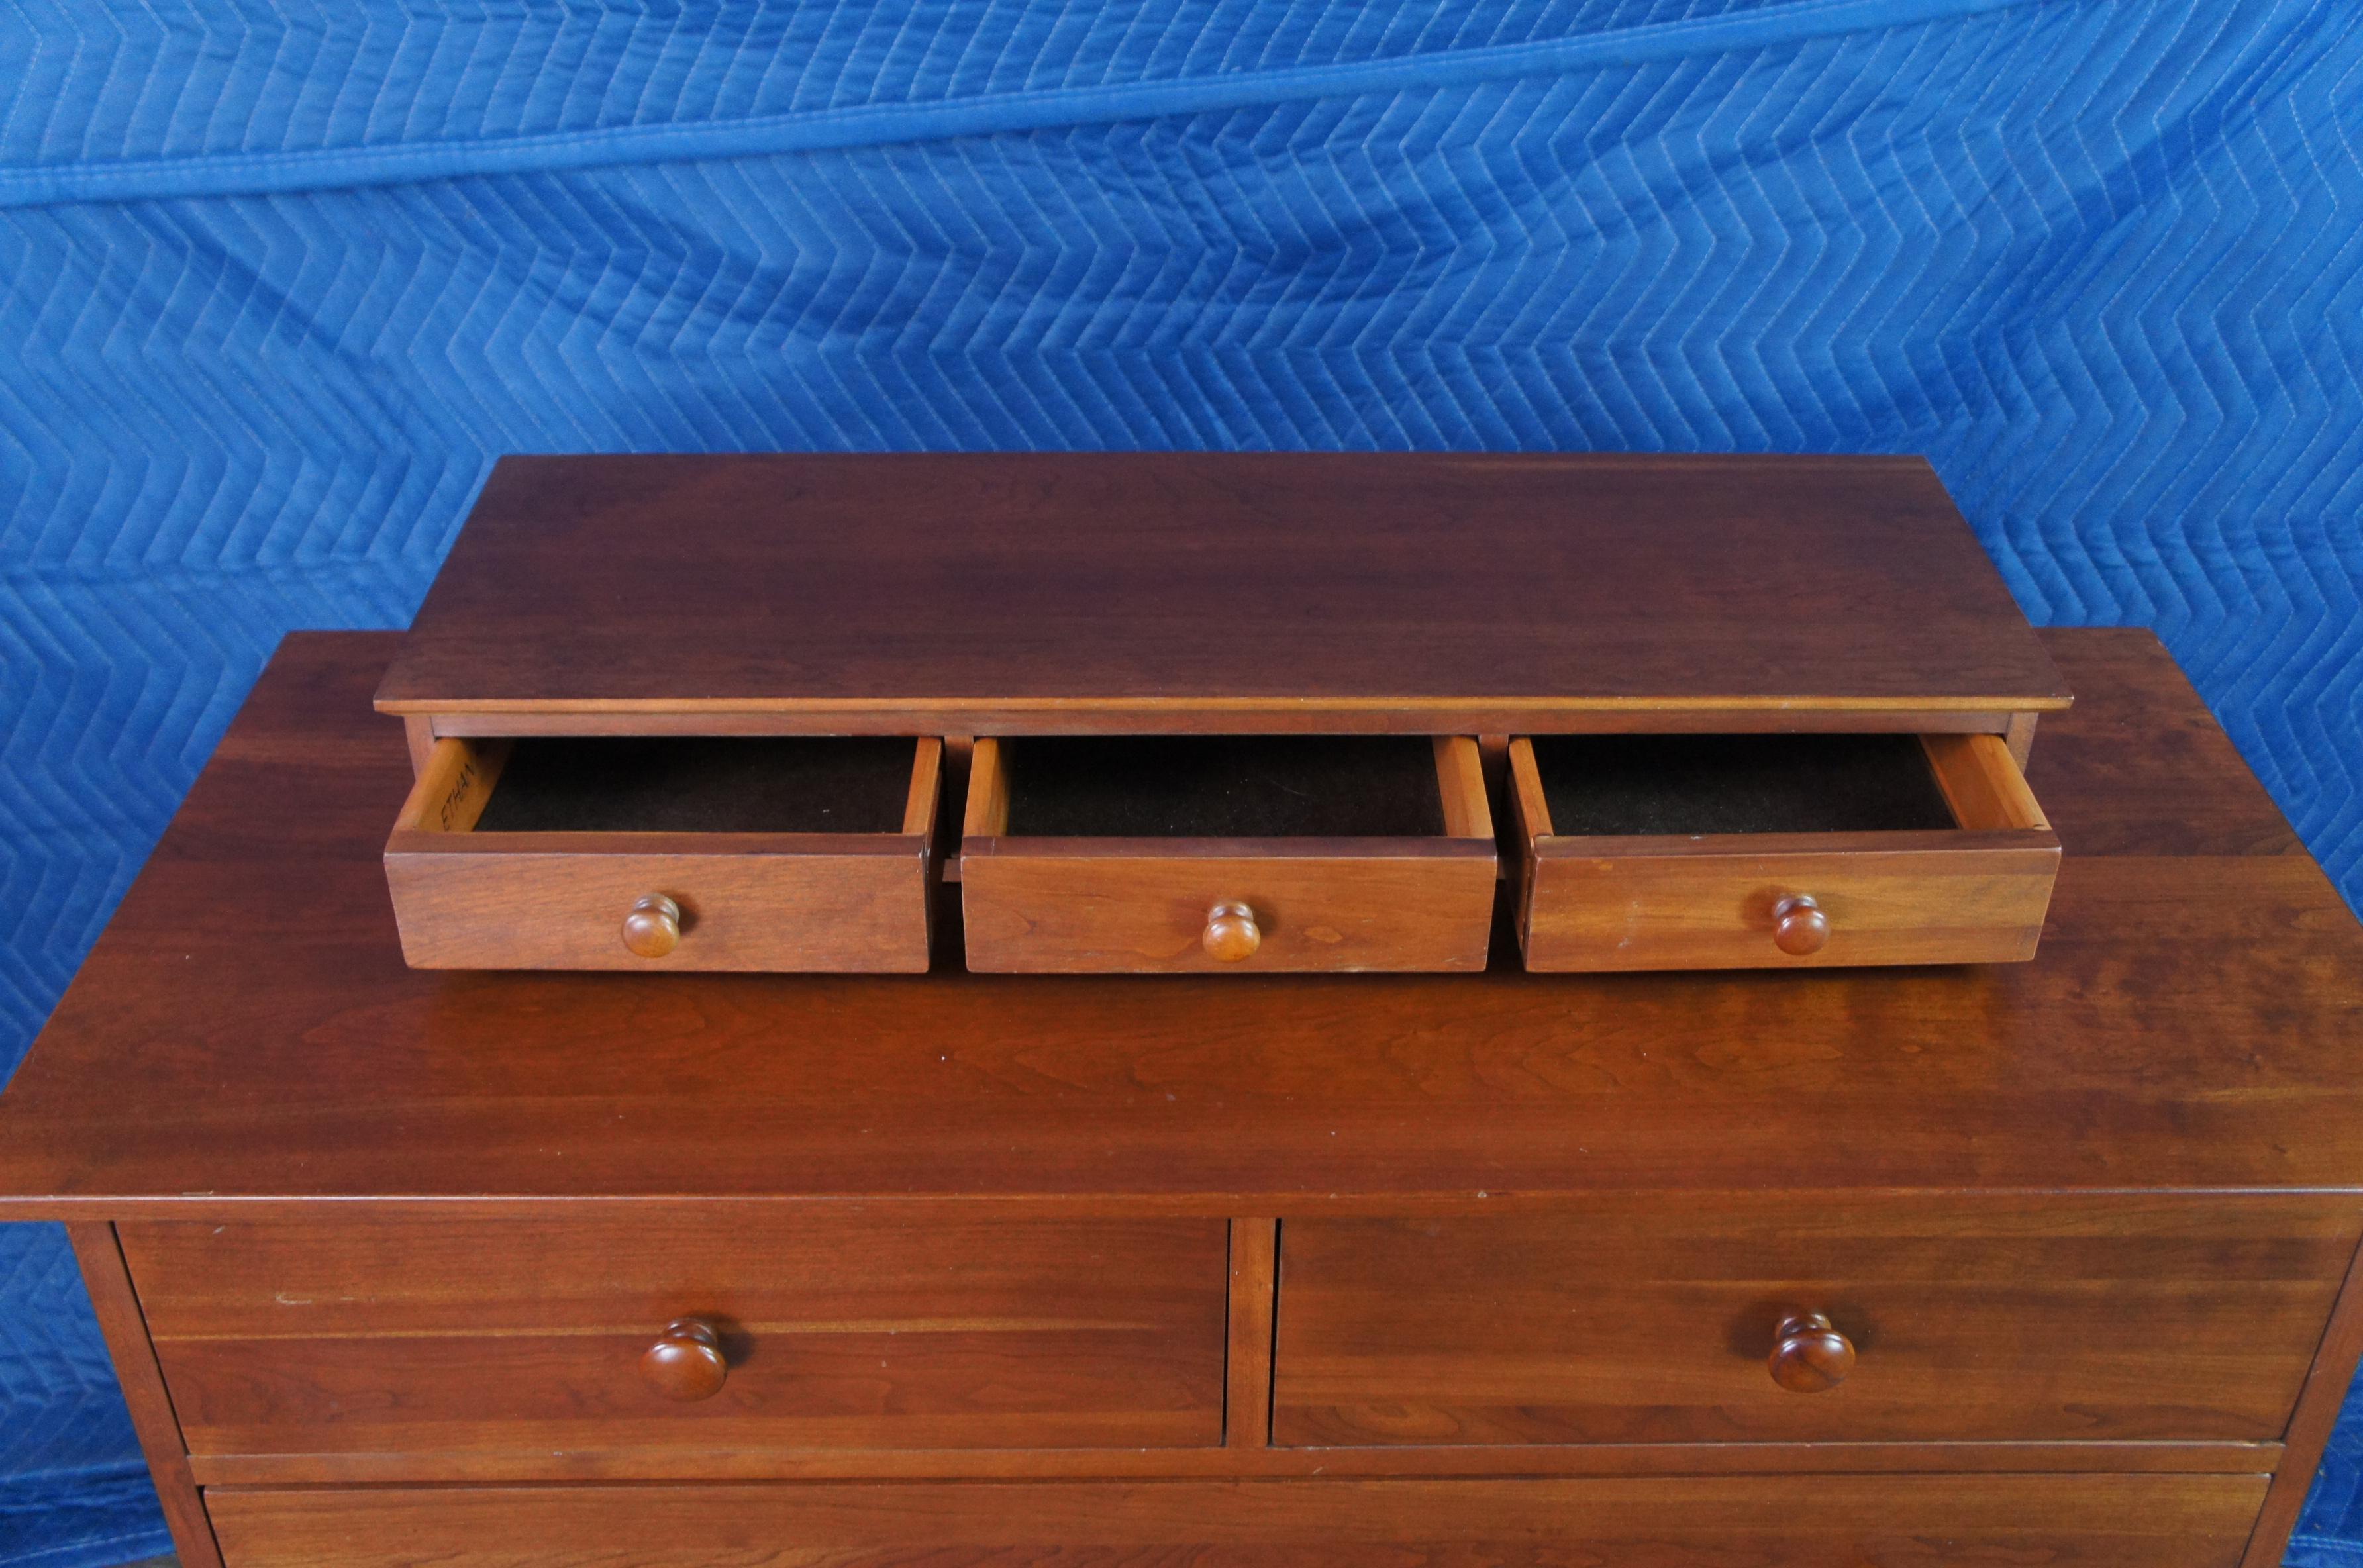 1993 Ethan Allen American Impressions Cherry Chest of Drawers Dresser 24-5401 In Good Condition In Dayton, OH